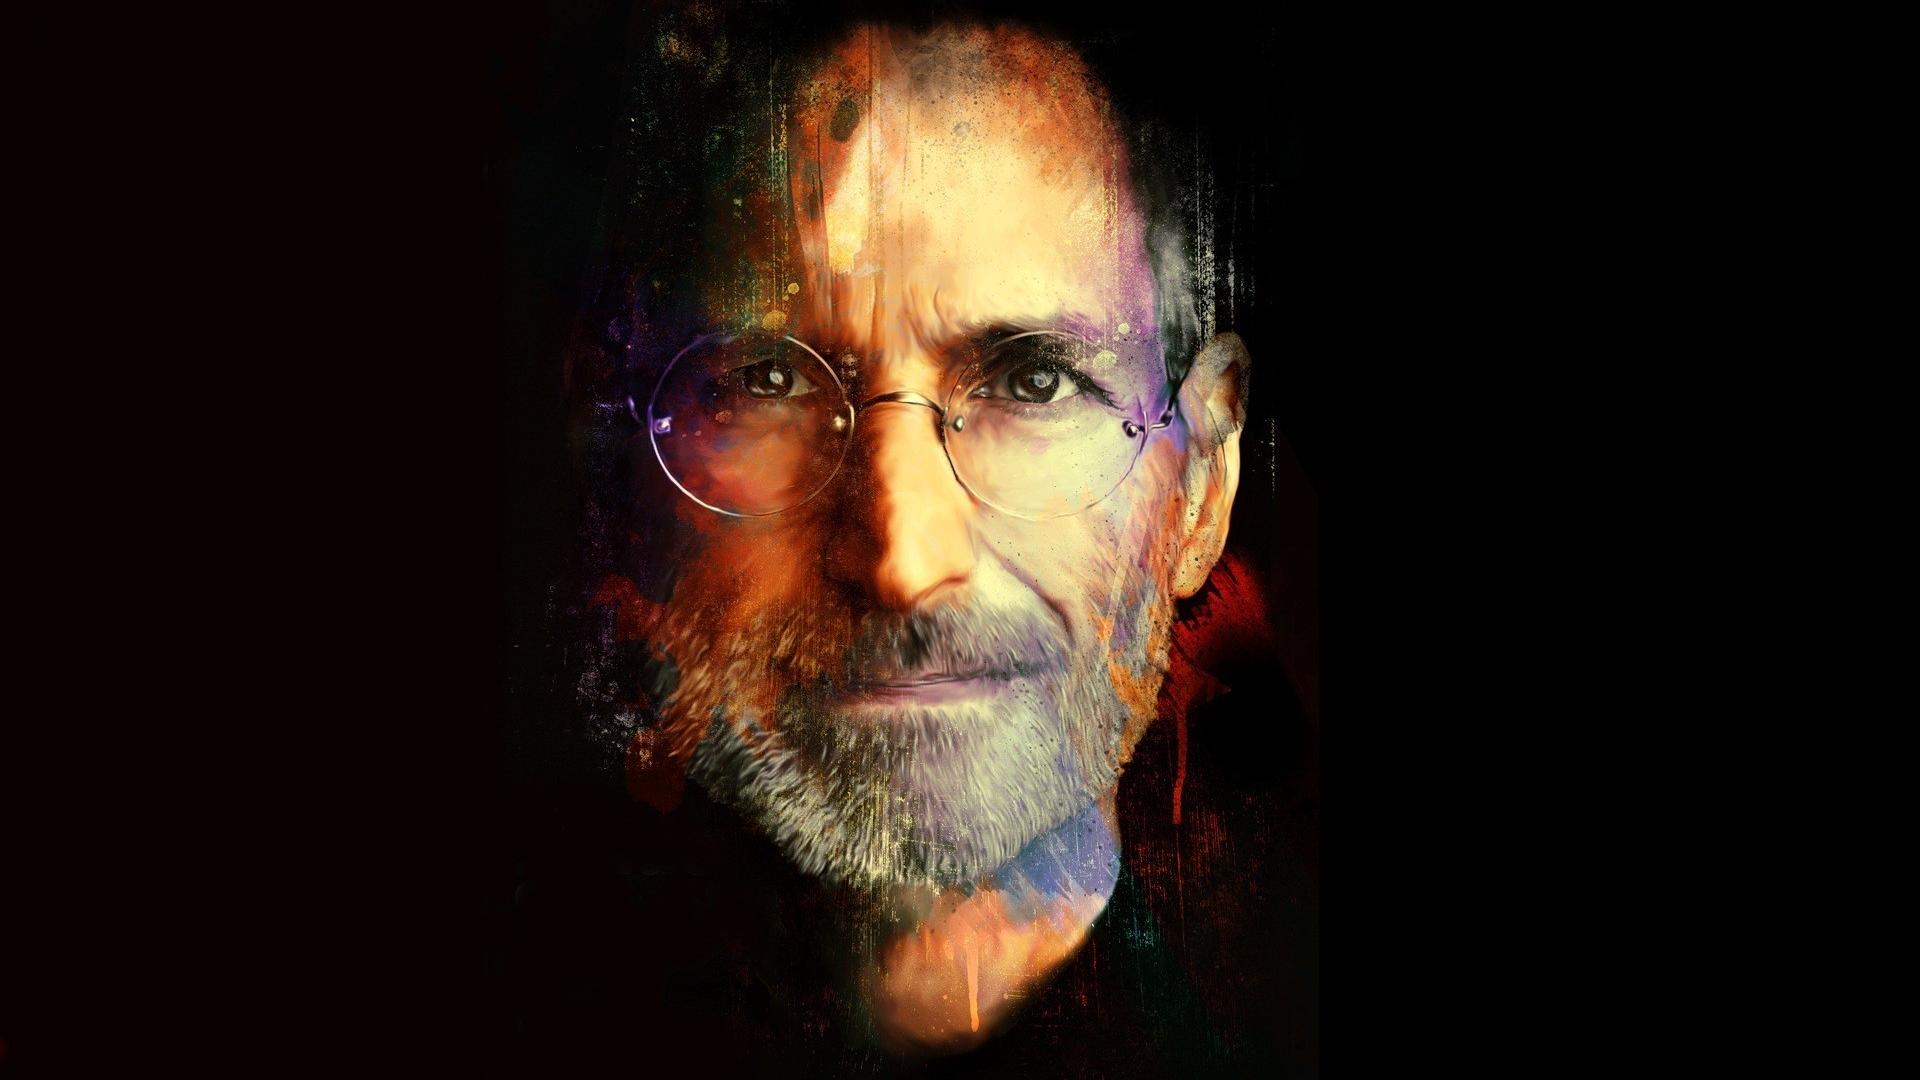 Wallpaper Steve Jobs face creative picture 2560x1600 HD Picture Image